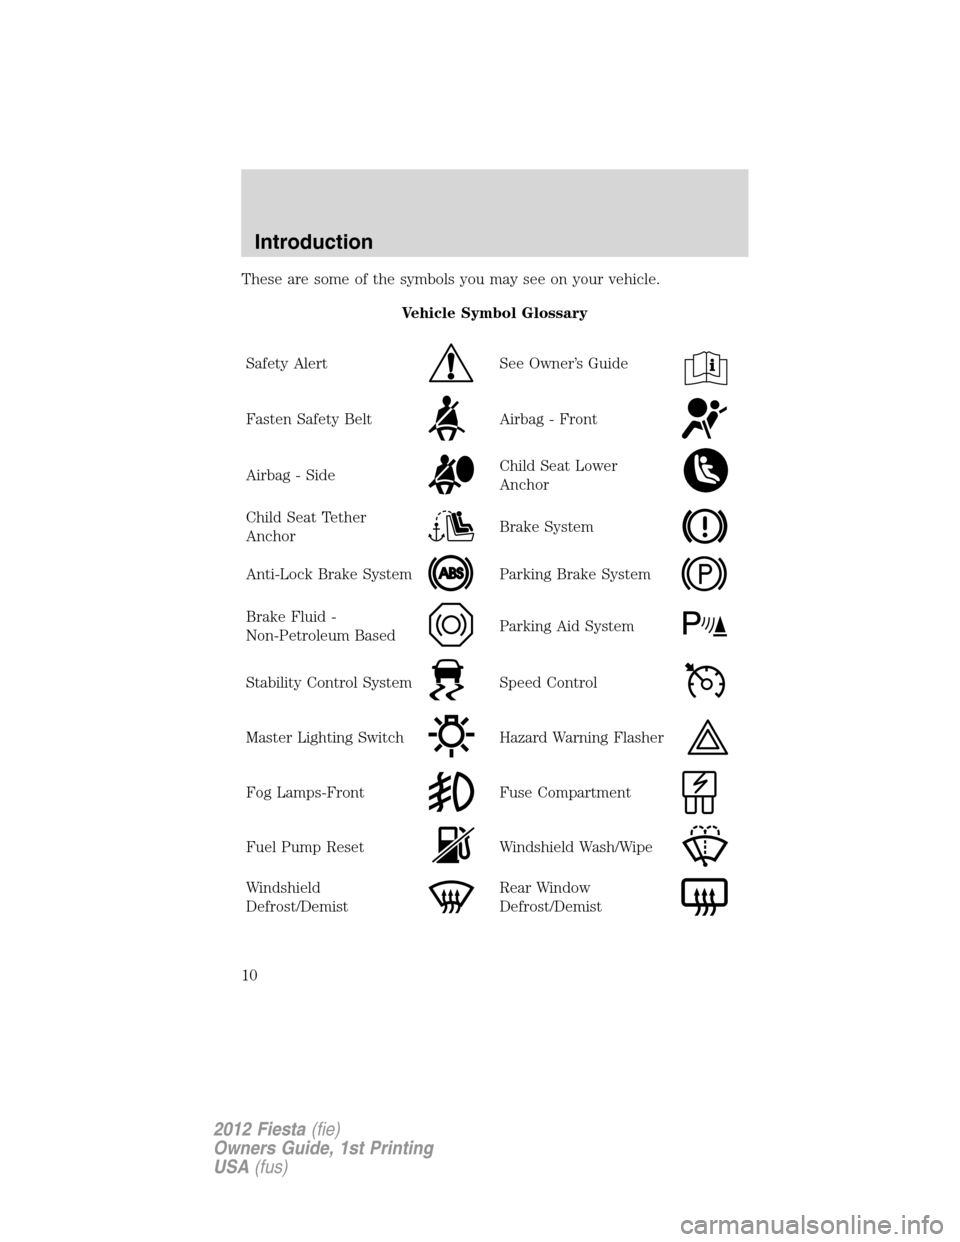 FORD FIESTA 2012 6.G Owners Manual These are some of the symbols you may see on your vehicle.
Vehicle Symbol Glossary
Safety Alert
See Owner’s Guide
Fasten Safety BeltAirbag - Front
Airbag - SideChild Seat Lower
Anchor
Child Seat Tet